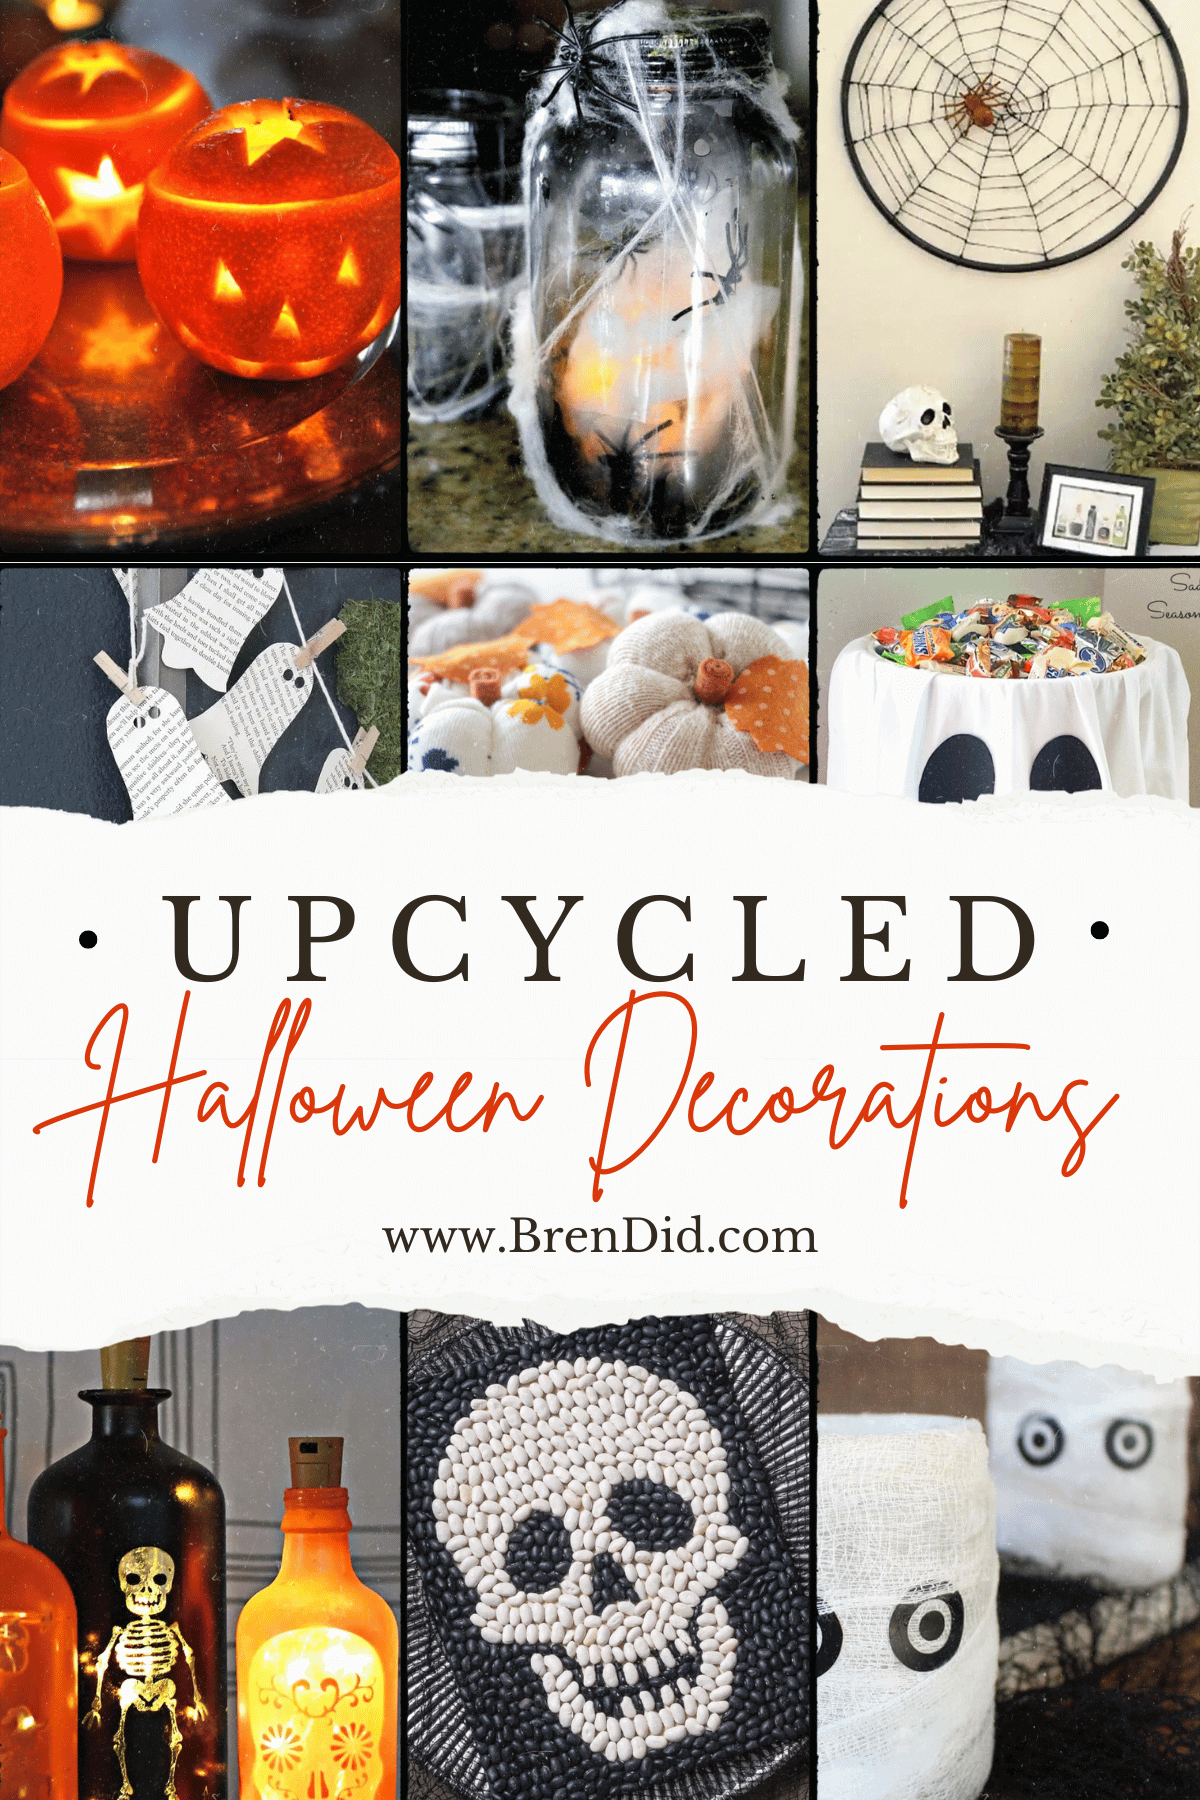 Recycled Crafts: Easy Upcycling Projects Adults Will Love - DIY Candy